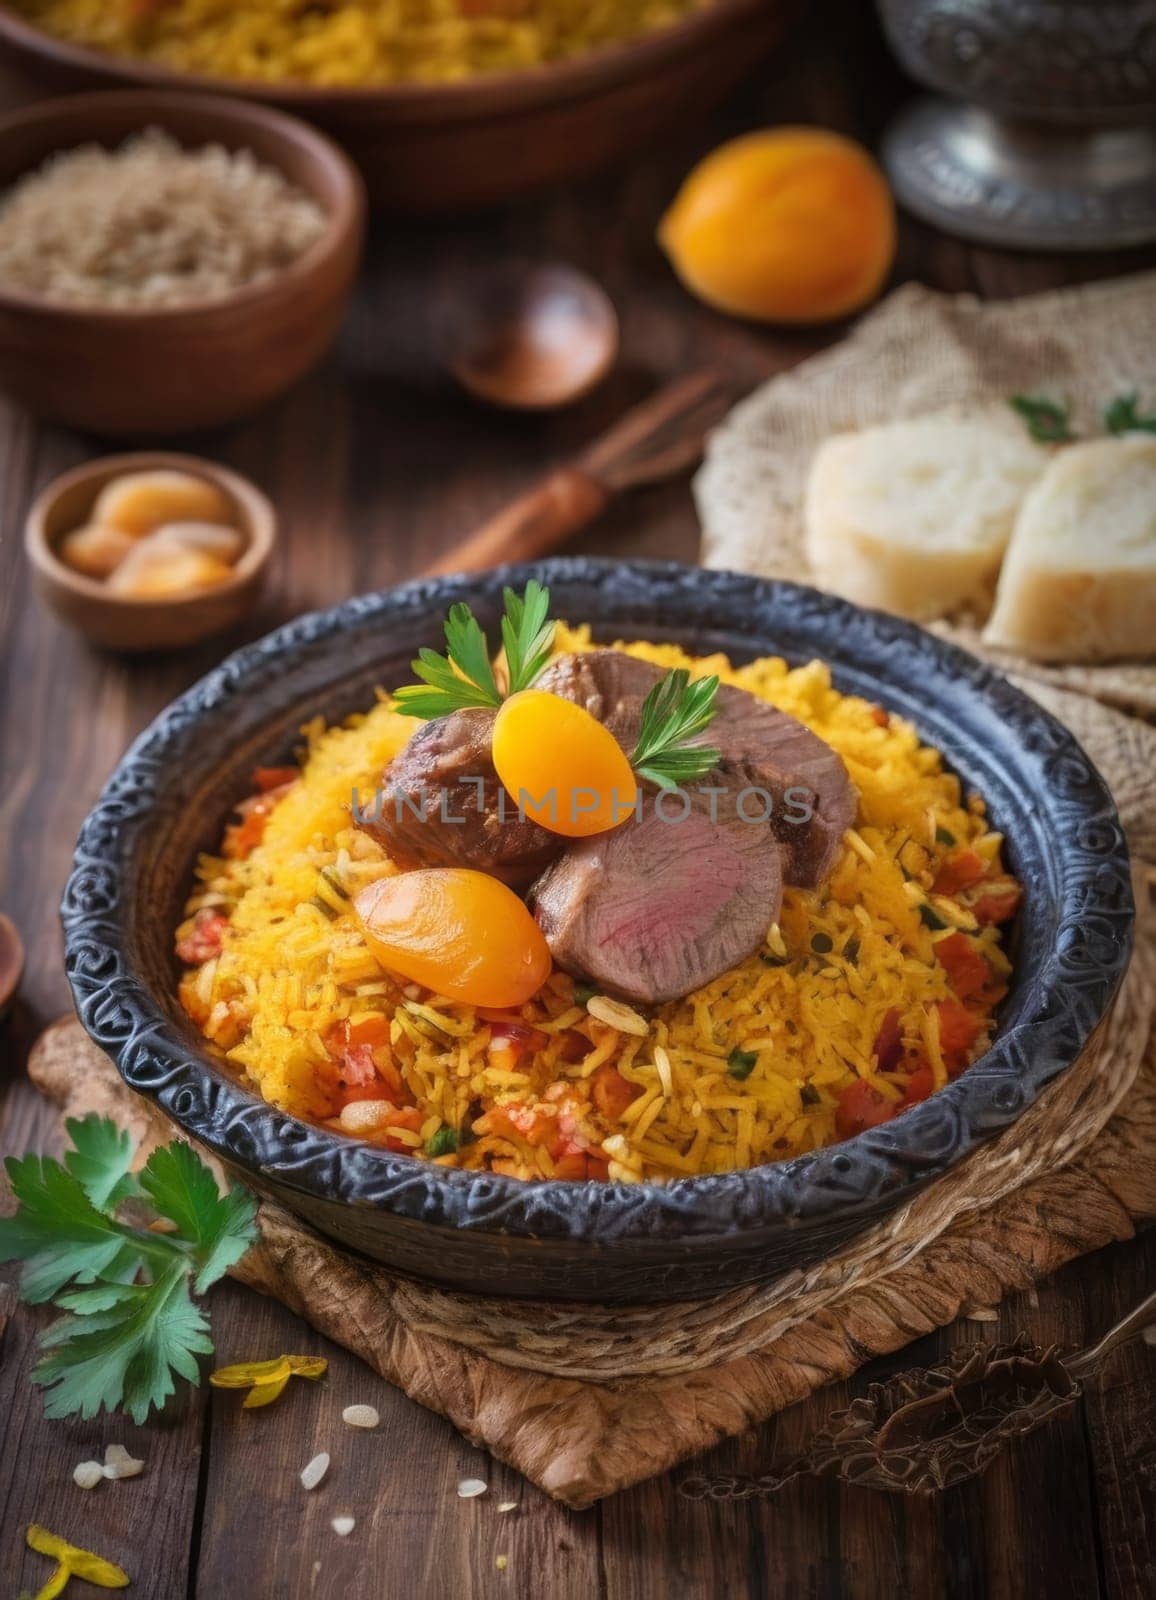 Azerbaijani plov in an ornate dish, rice pilaf with saffron, apricots, and lamb. A traditional Azerbaijani dish known for its rich flavors and aromatic rice. by sfinks